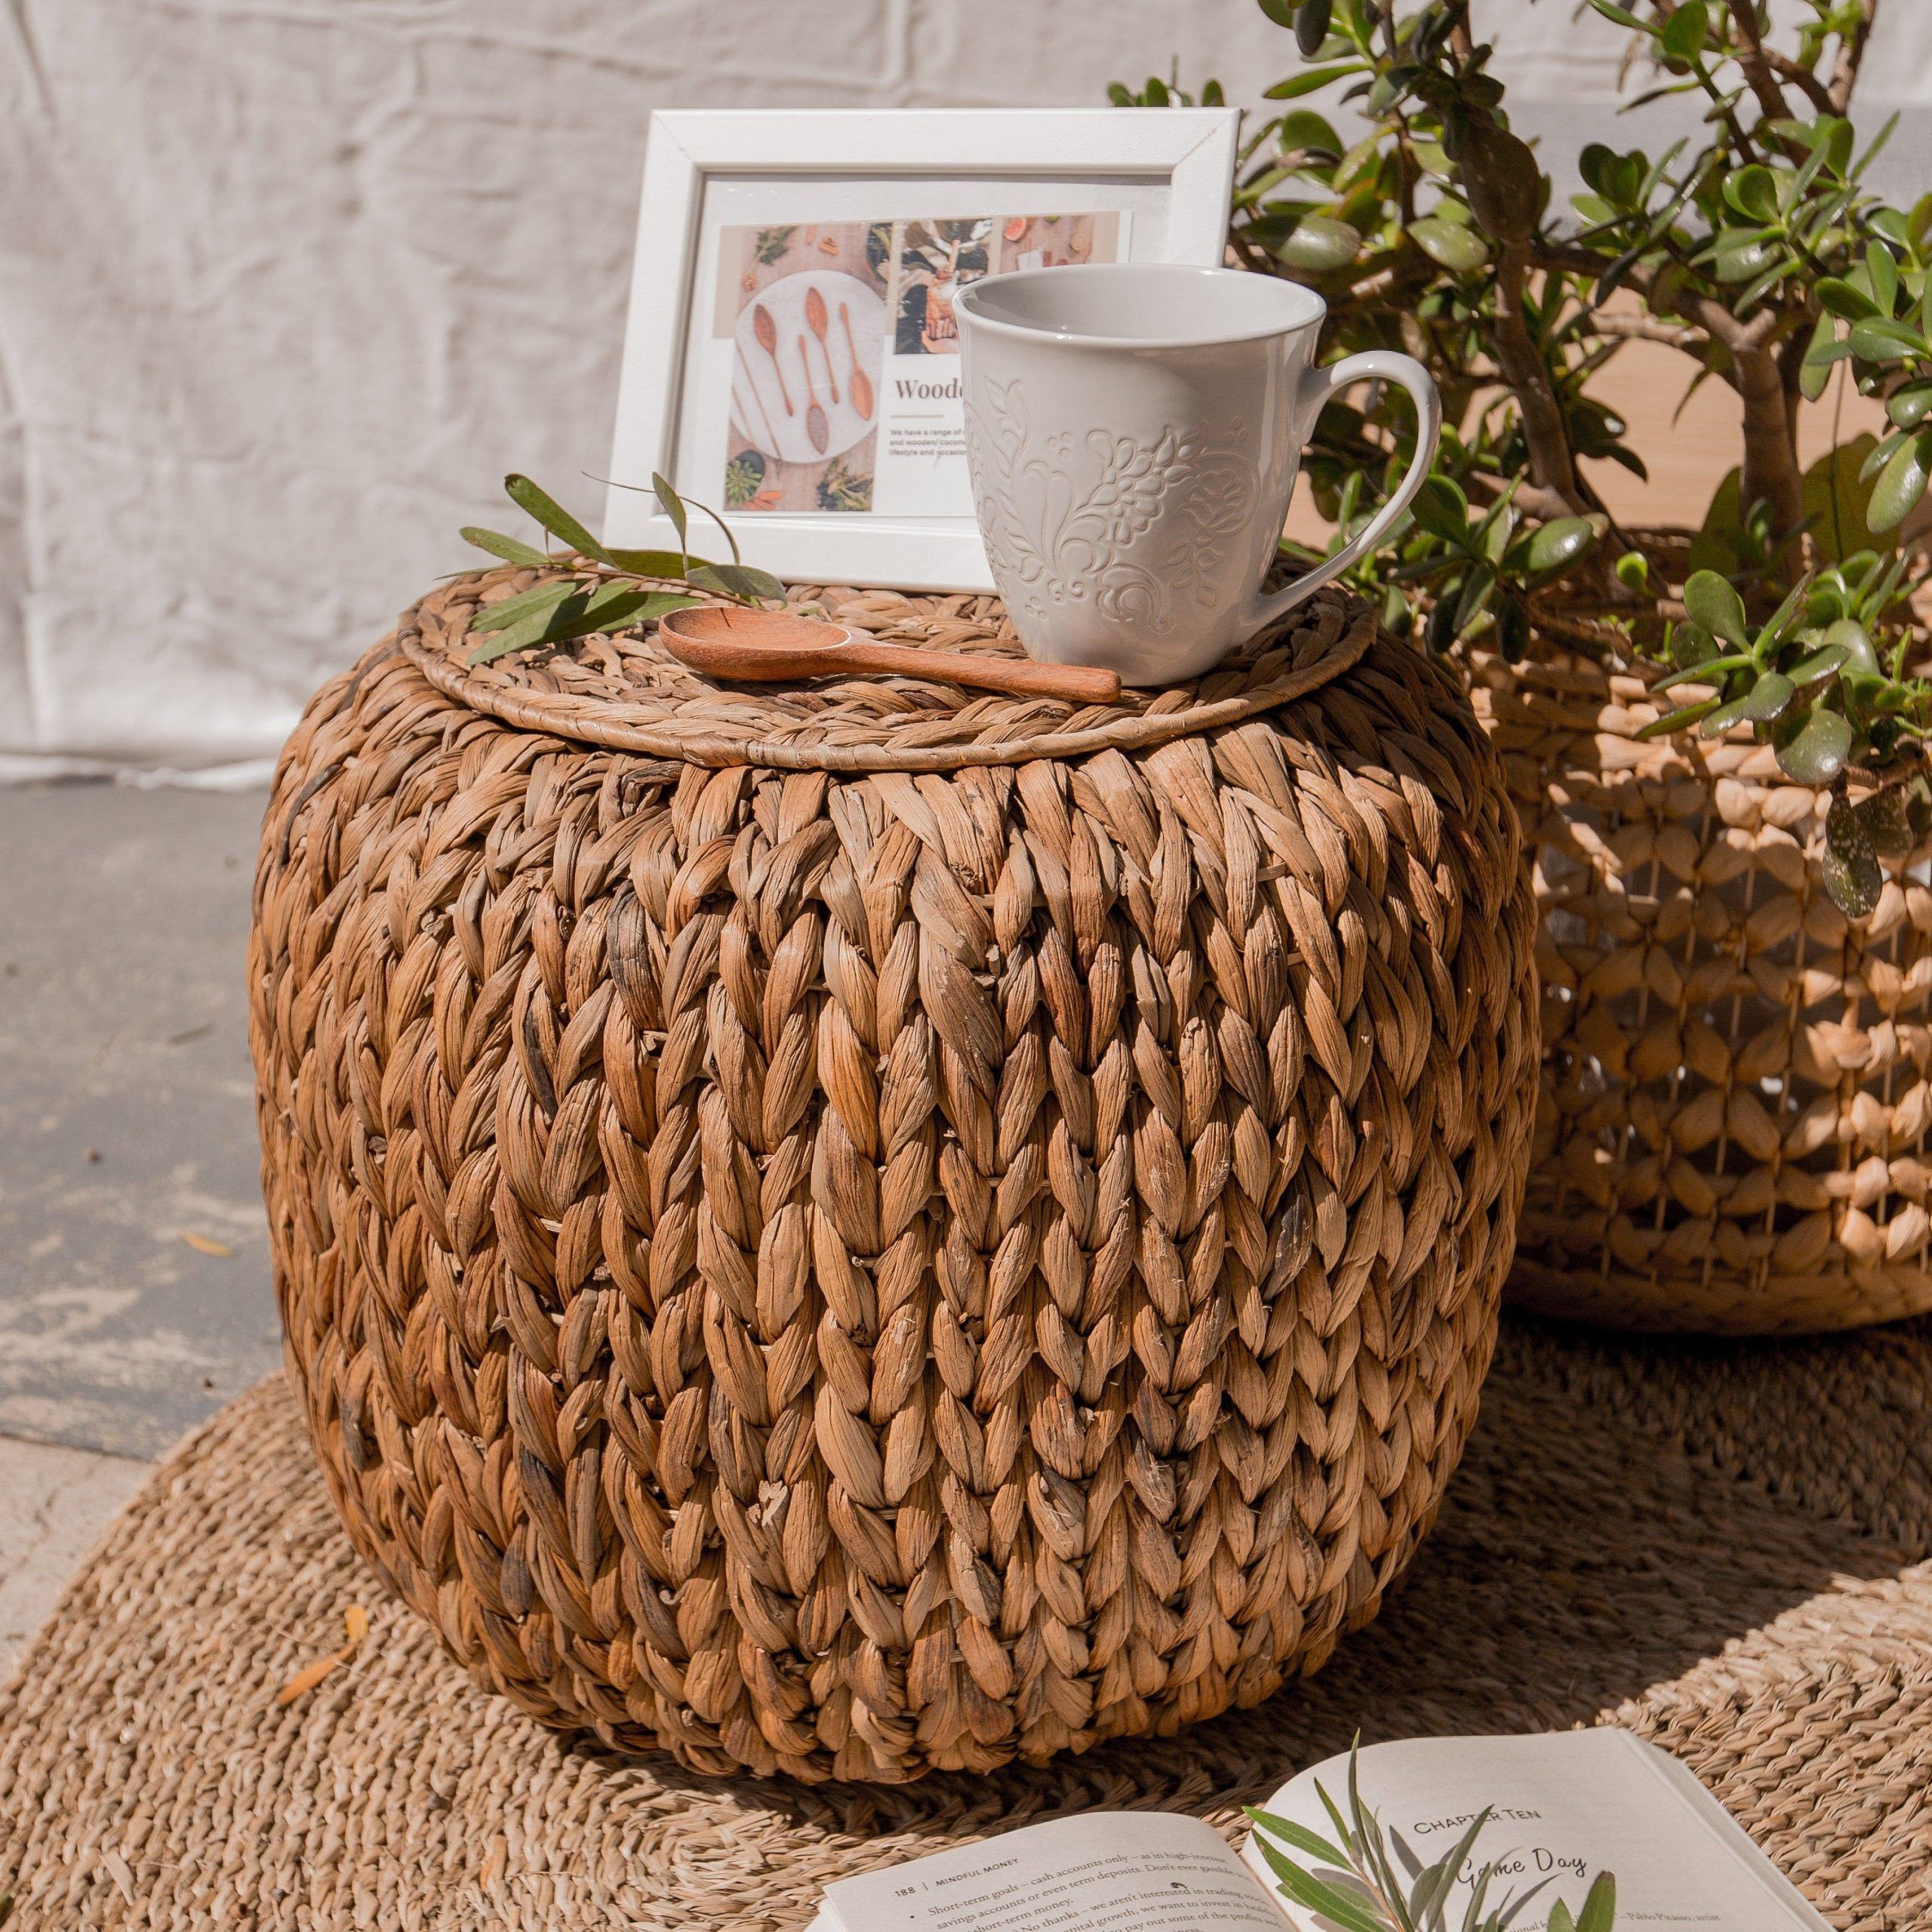 Hand Woven Rattan Storage Barrel, Seagrass Ottoman With Lid, Natural Regarding Traditional Hand Woven Pouf Ottomans (View 3 of 20)